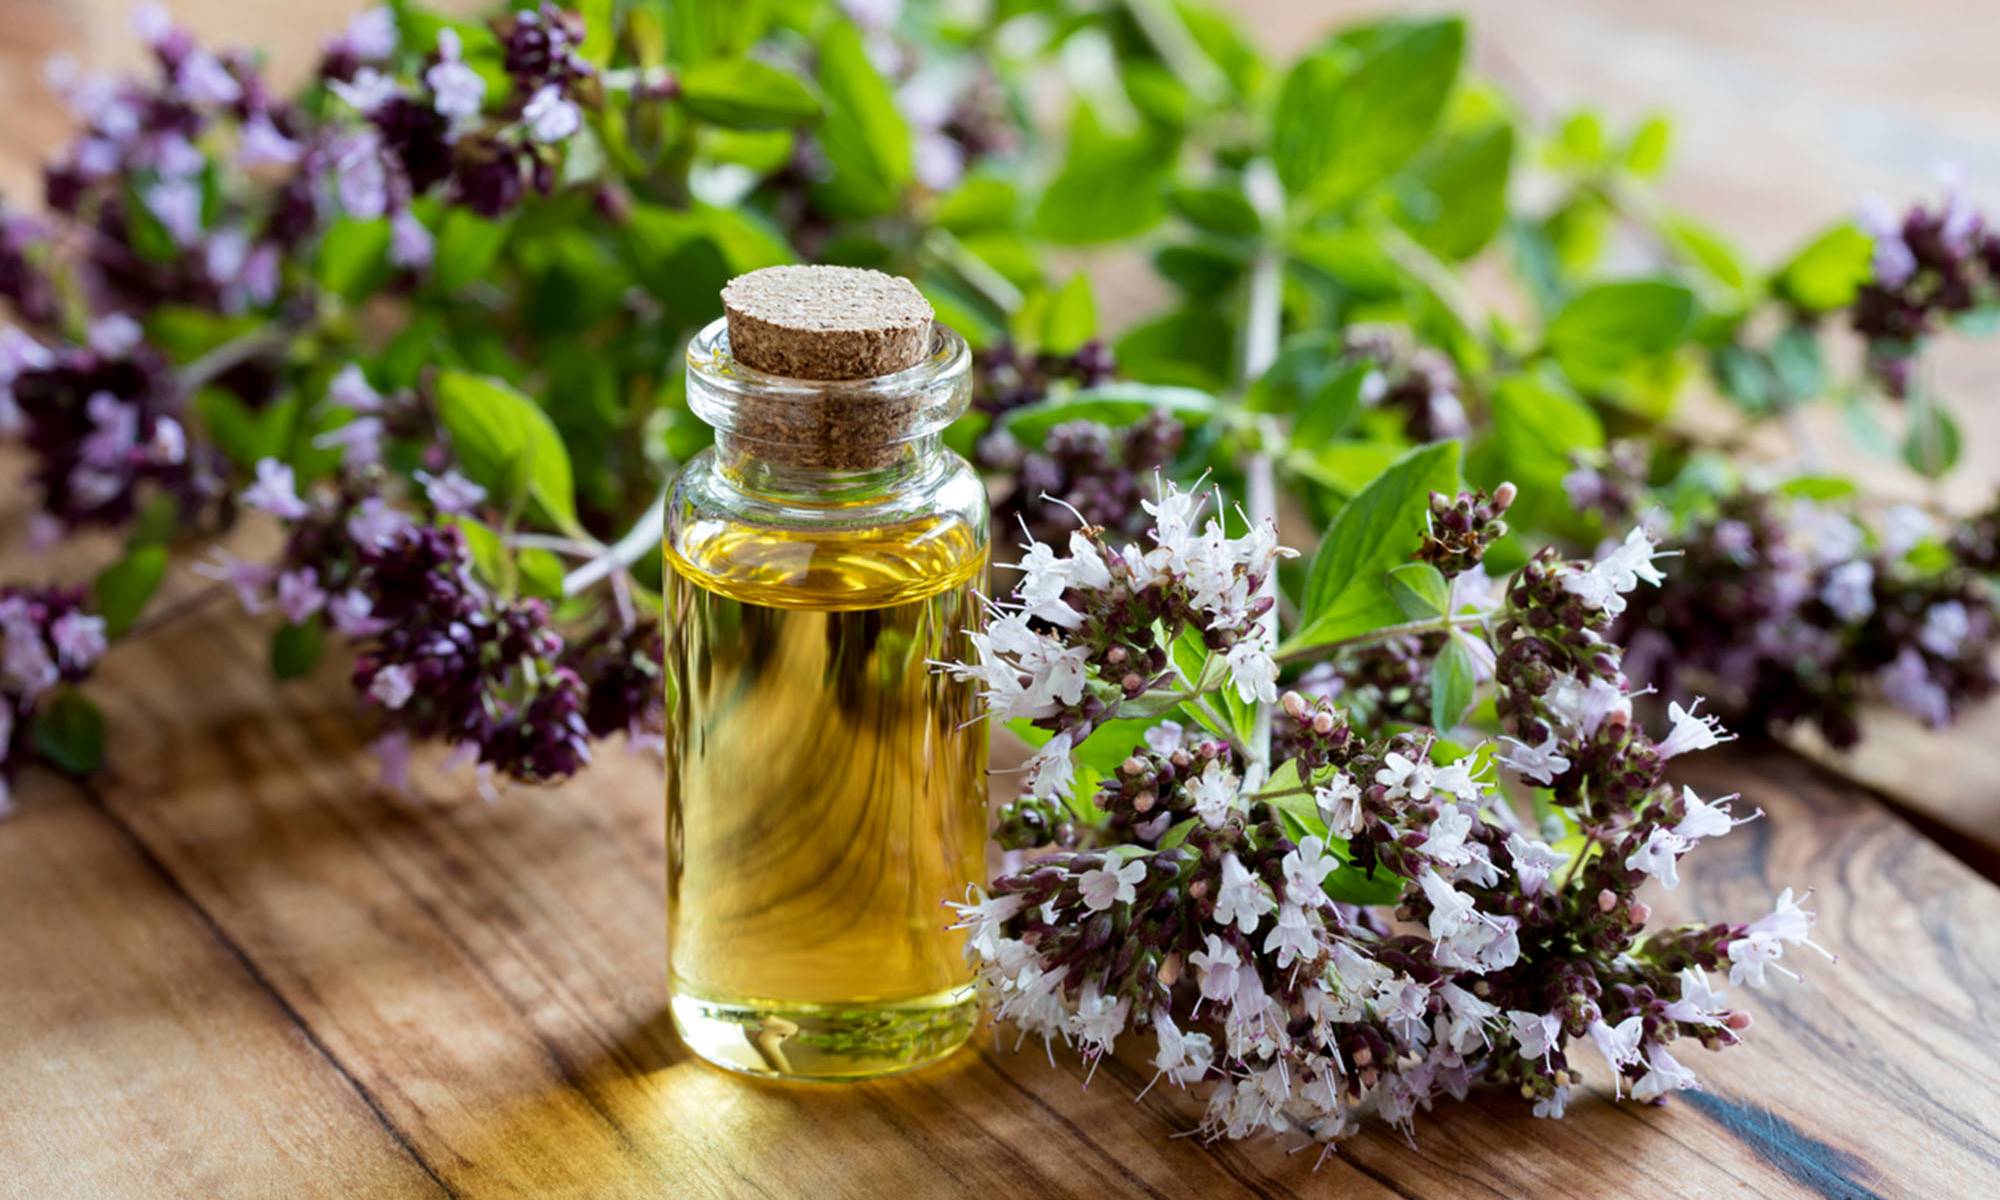 Oregano oil: To control cold, cough to cholesterol, lets find out more